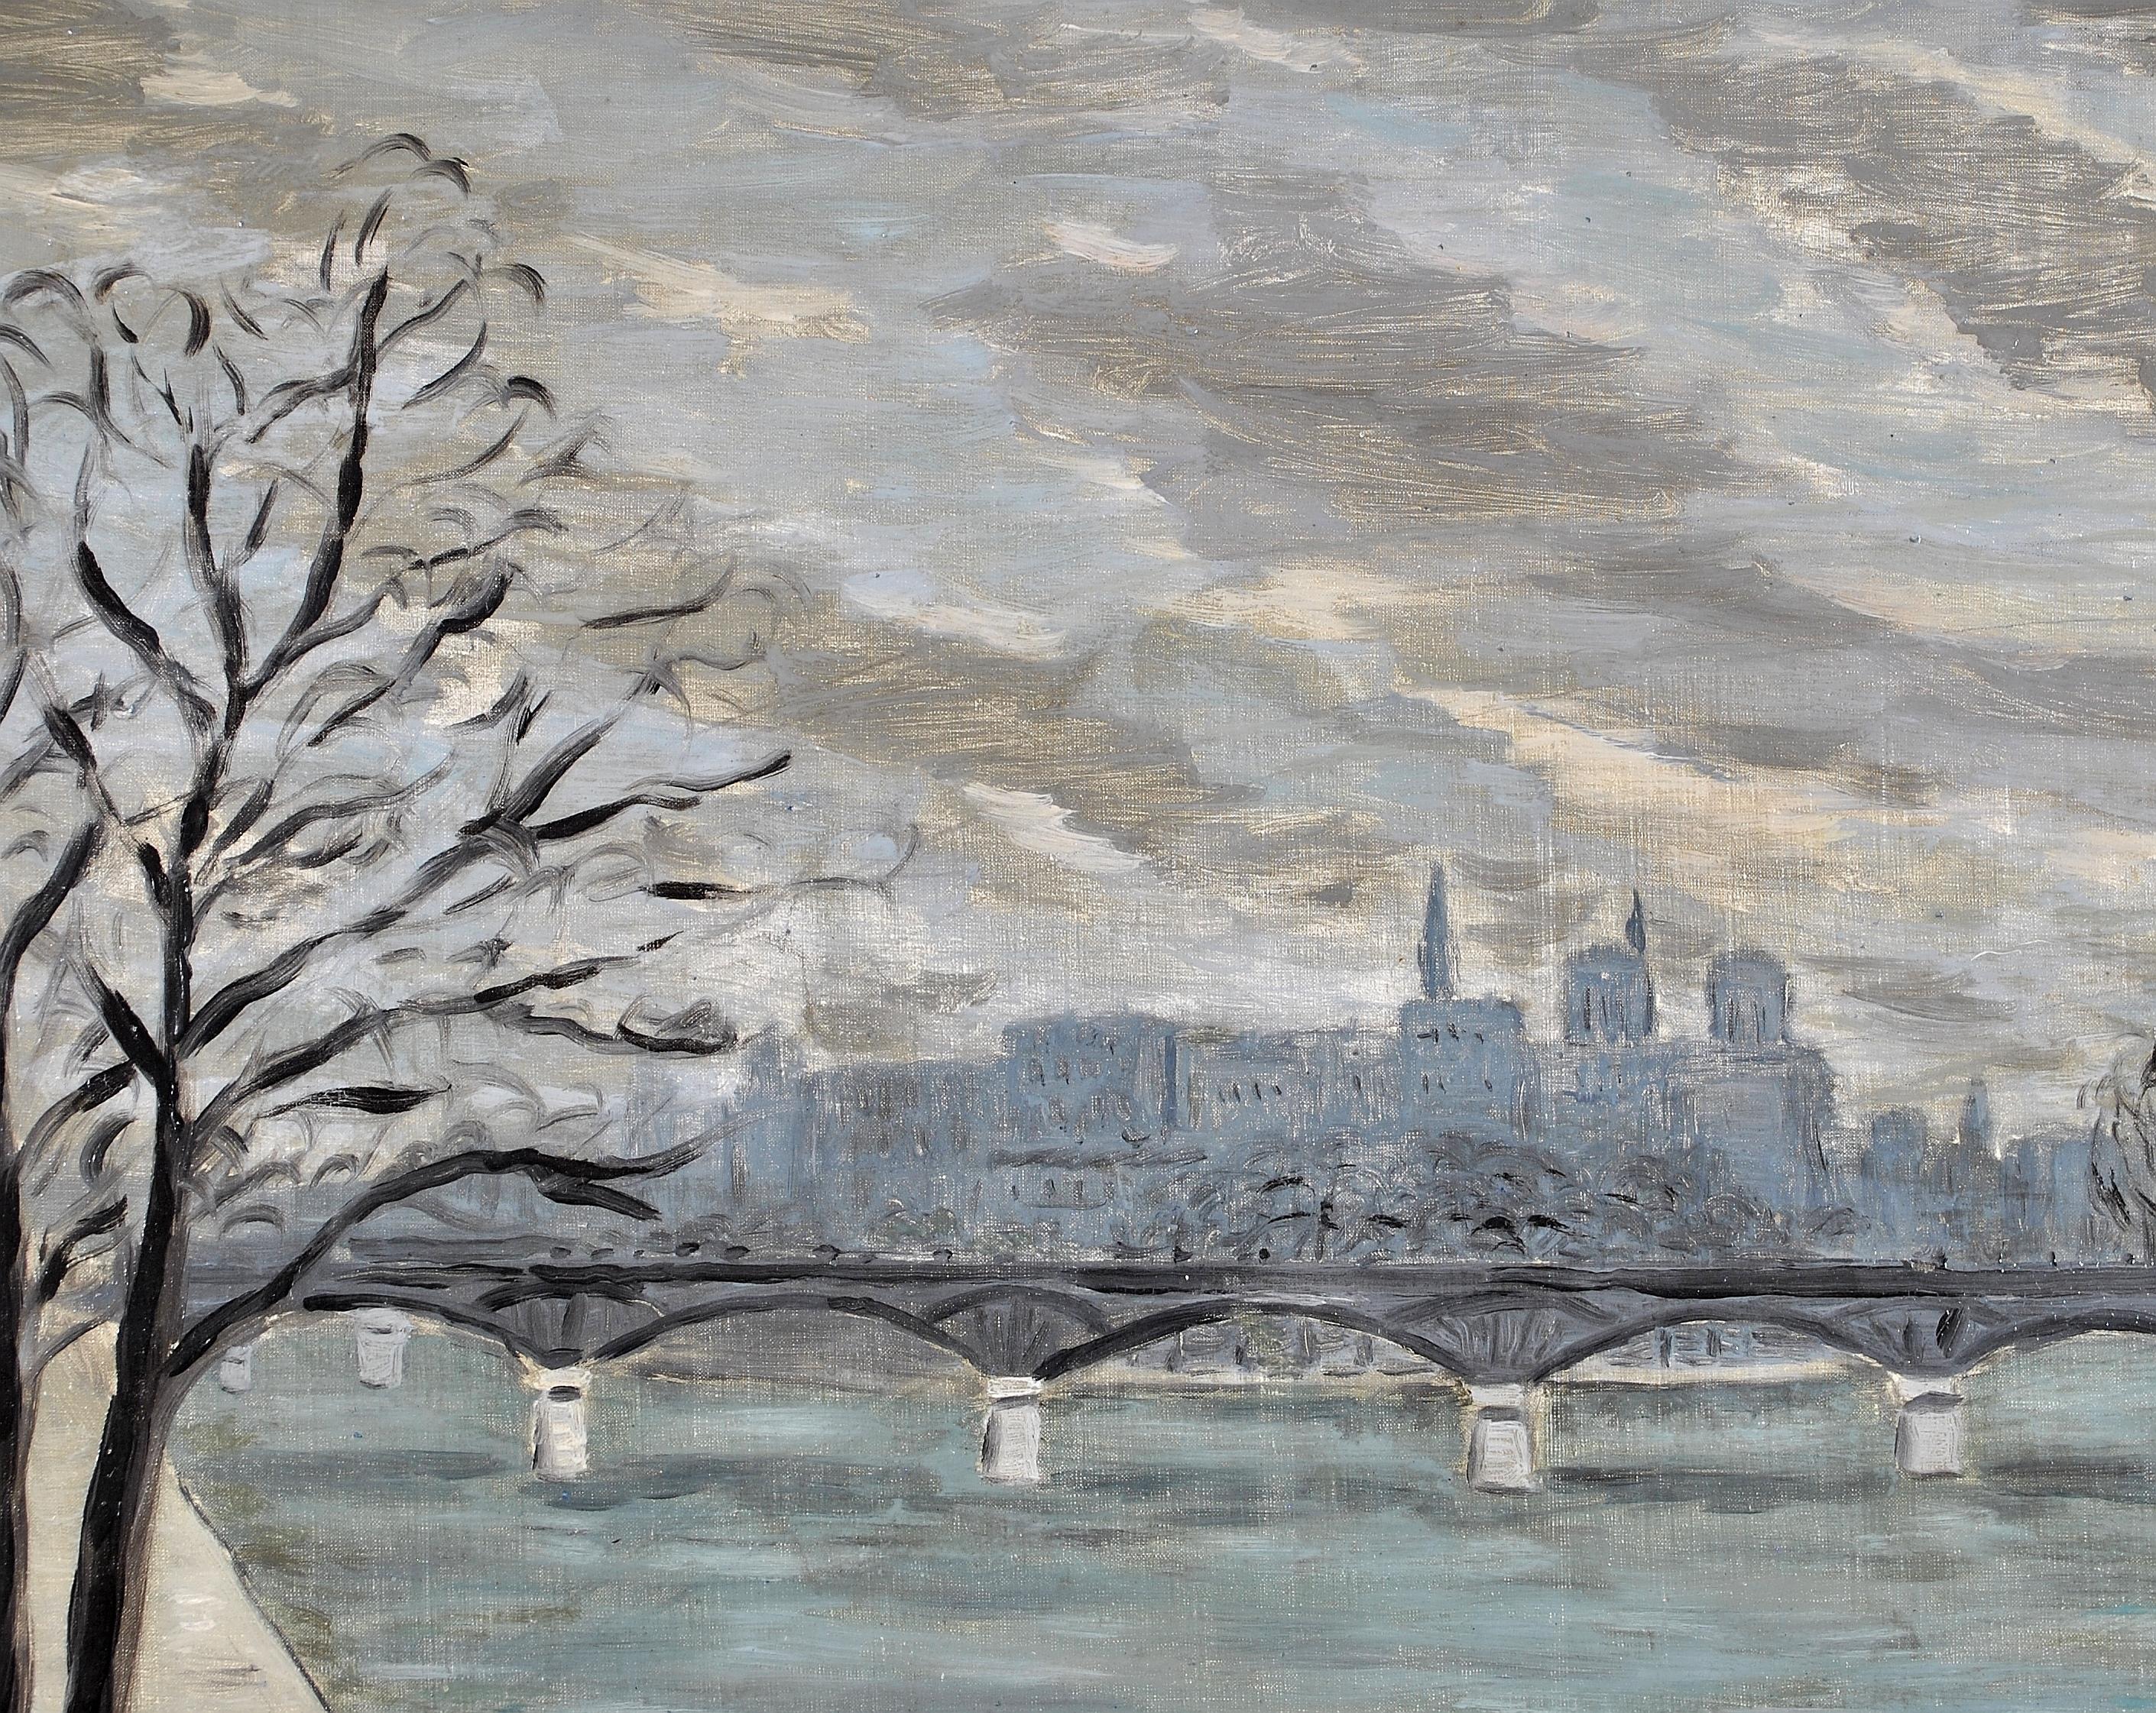 A very beautiful signed and dated 1936 impressionist oil on canvas by Lelia Caetani depicting the river Seine in Paris. 

The artist is very interesting - please see biography below - she was an Italian Princess who was friends with Andre Derain and